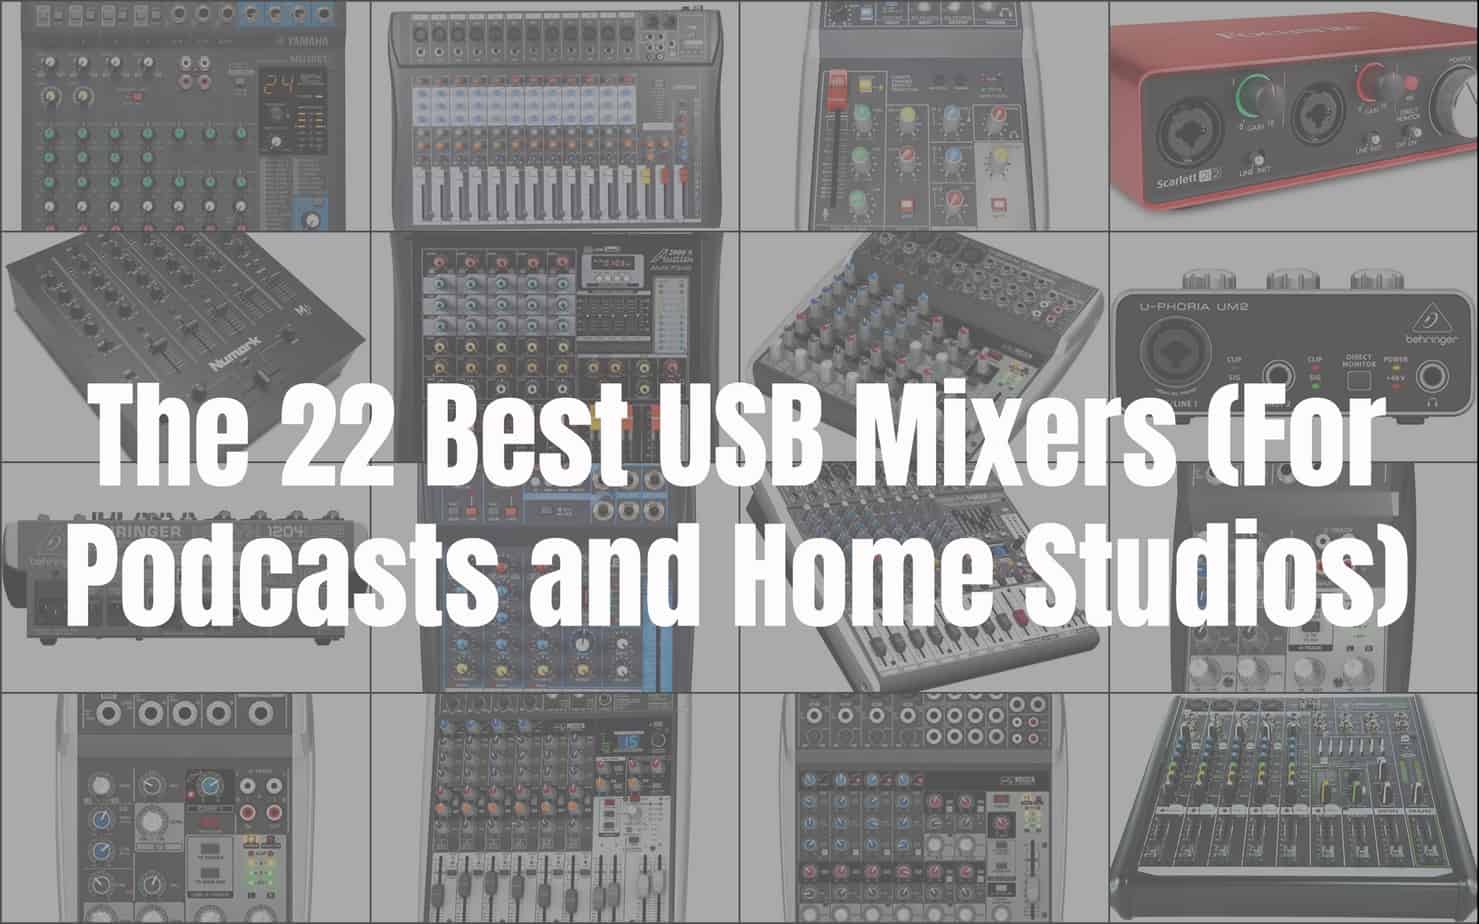 The 26 Best USB Mixers (for Podcasts and Home Studios) - Discover 